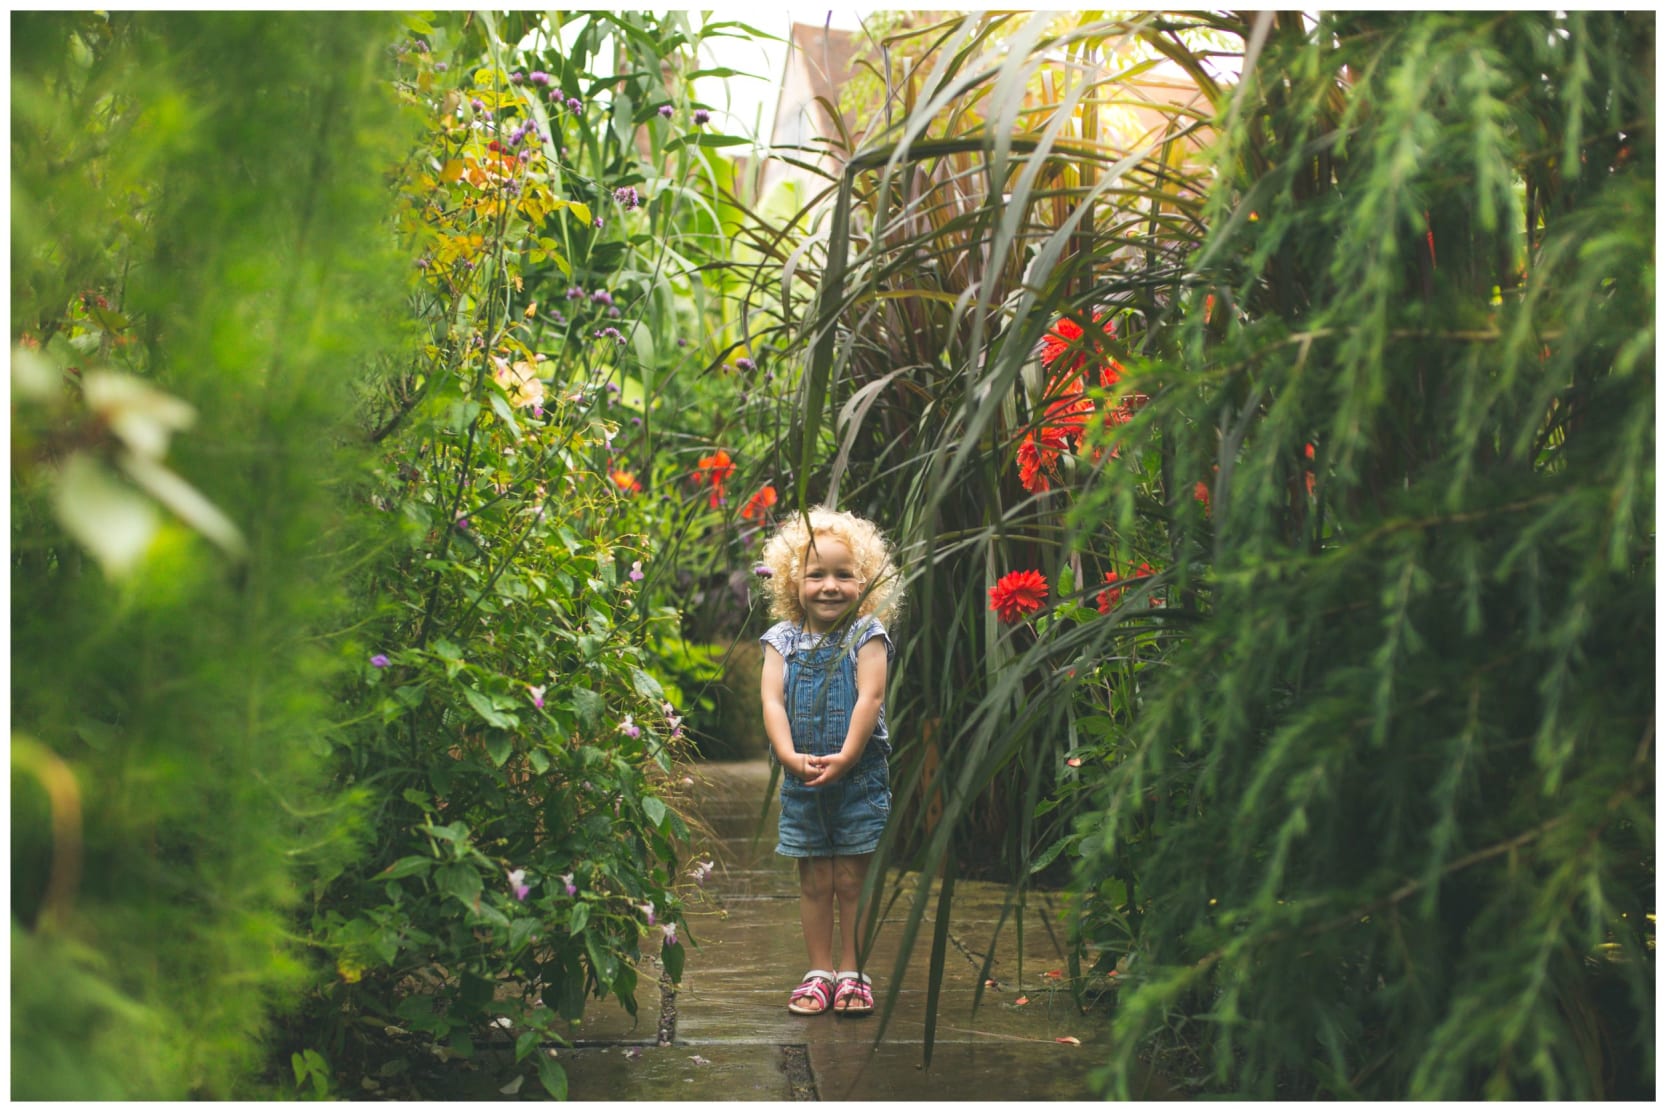 A child standing in the Exotic garden at Great Dixter while taking part in a family activity